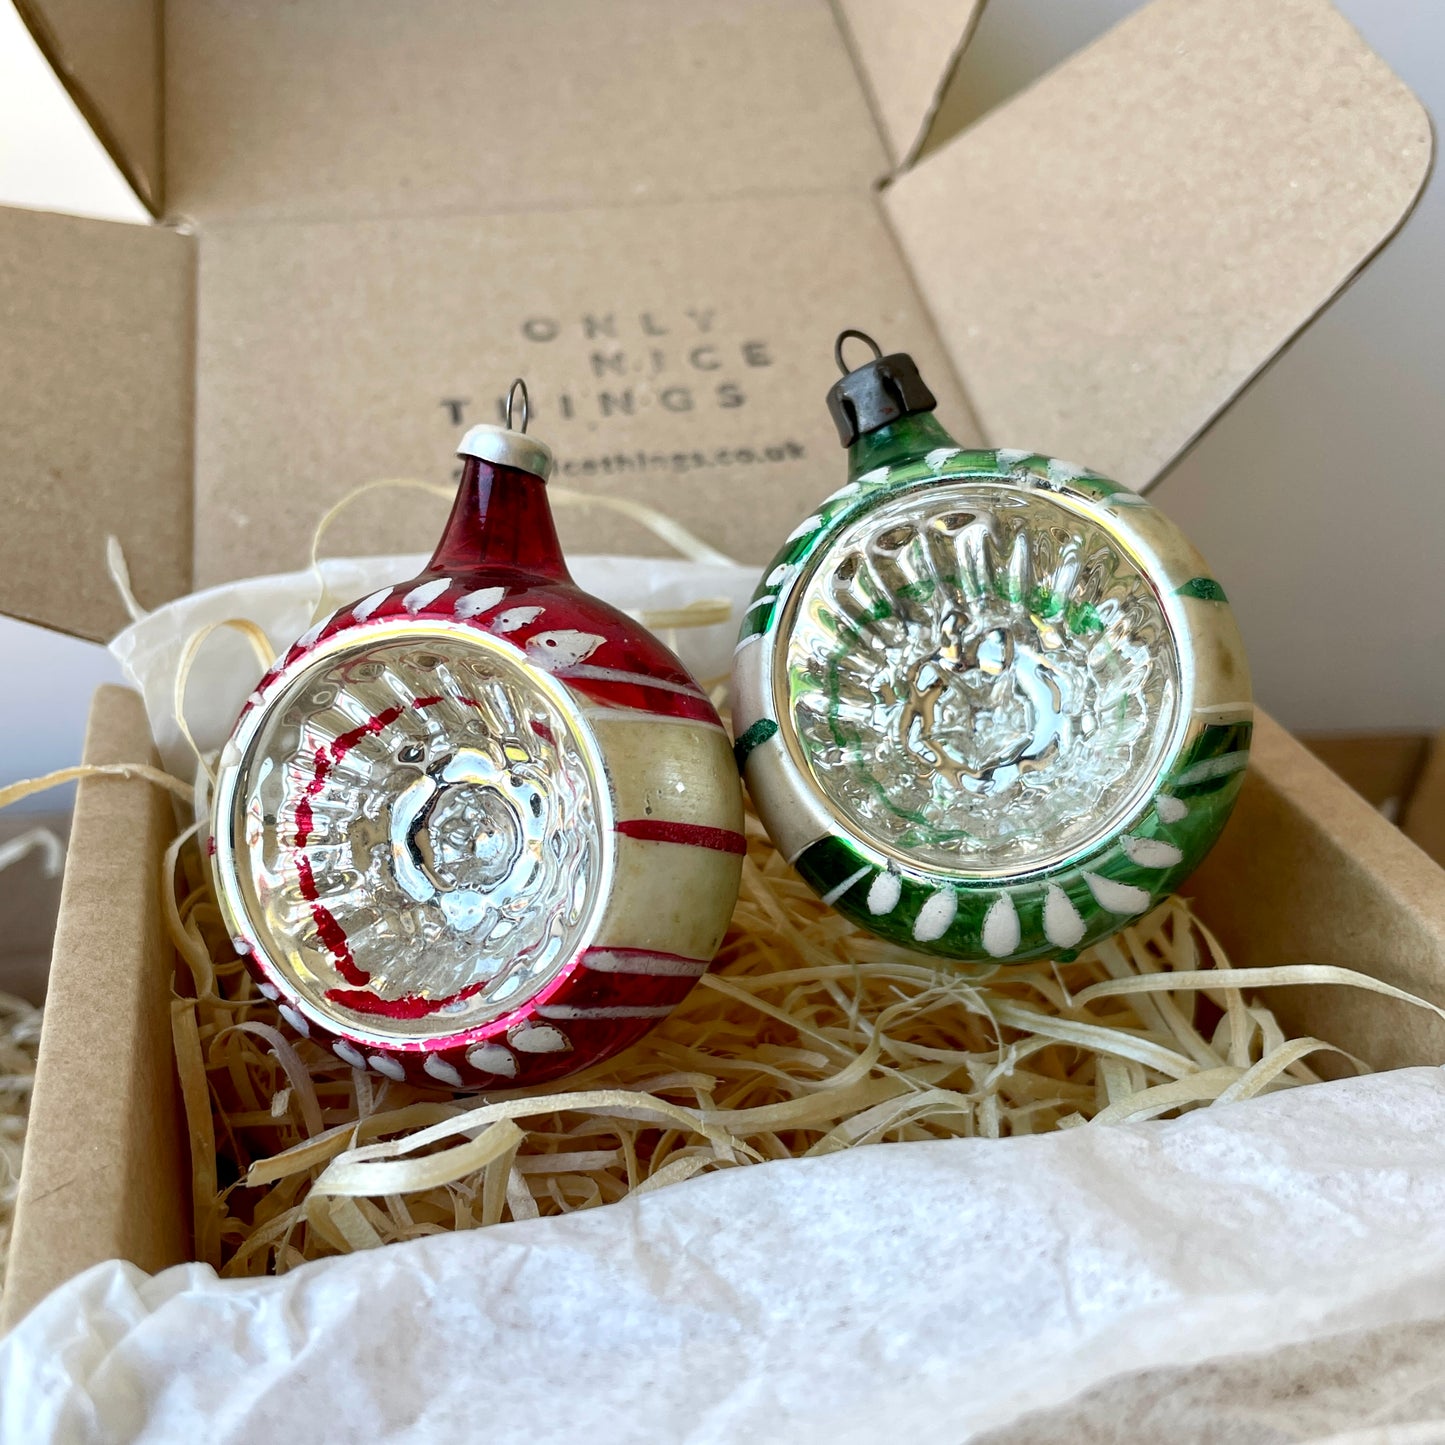 Two vintage concaved baubles